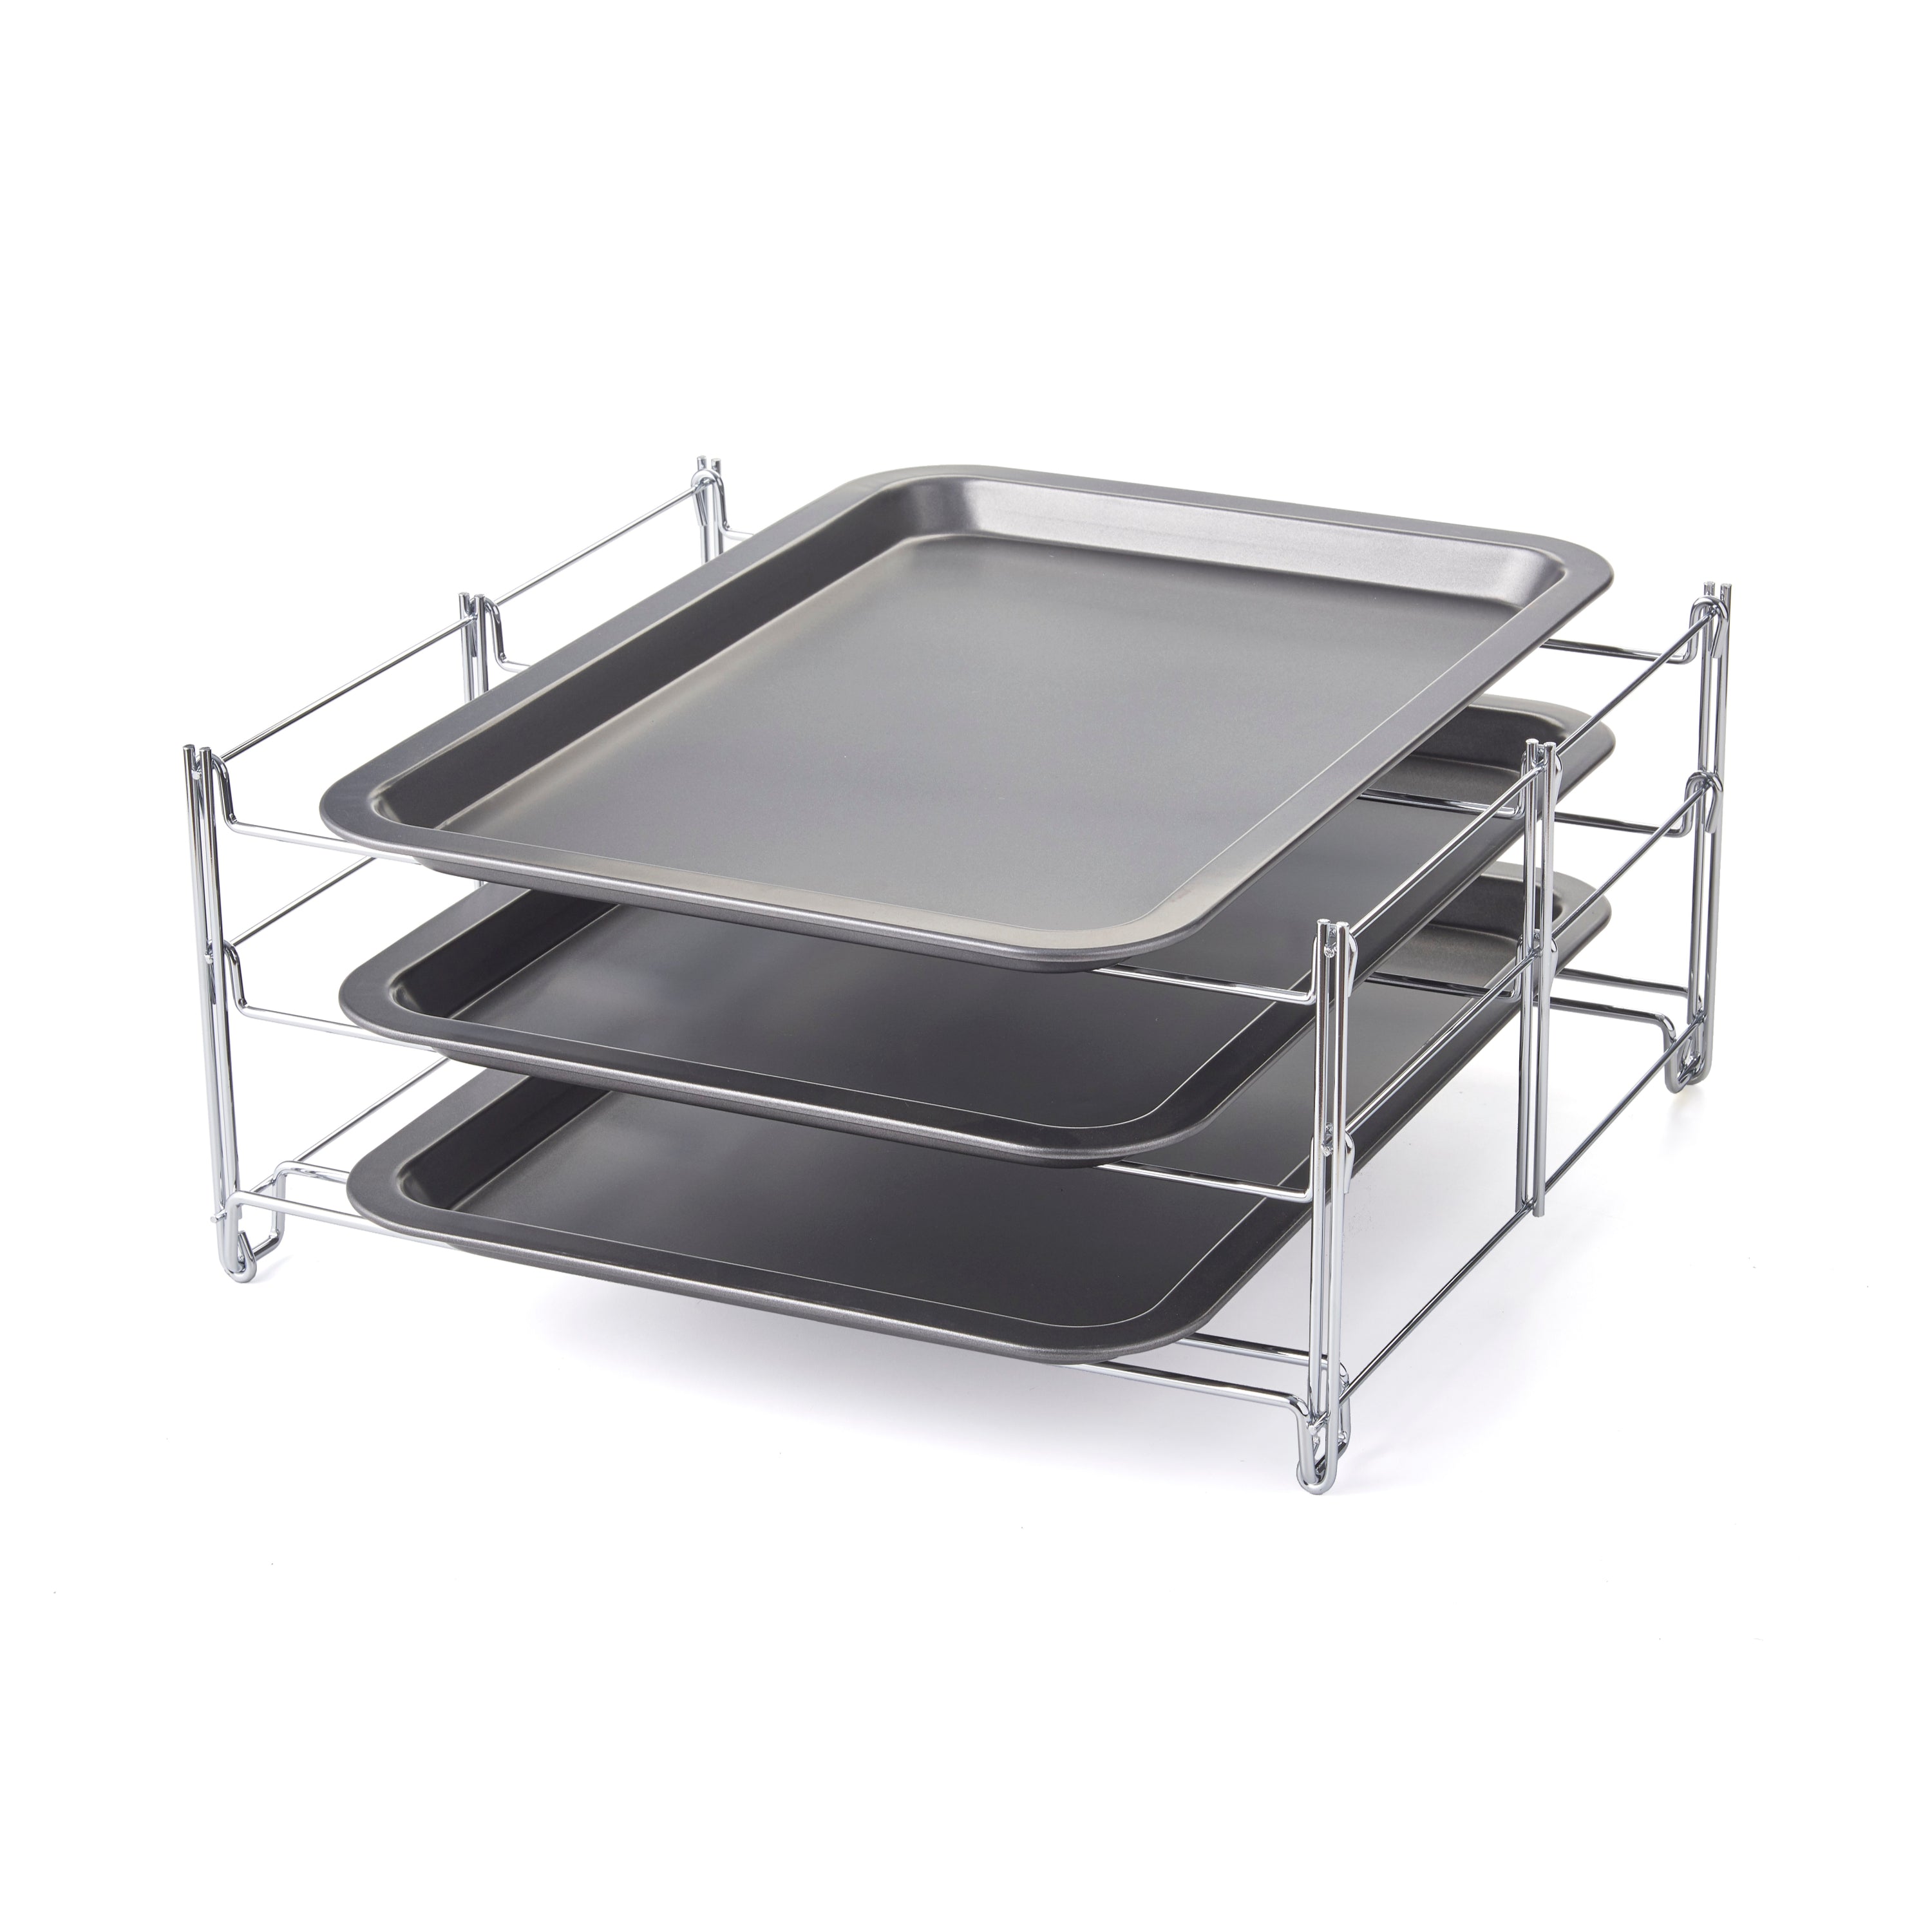 Nifty All in 1 Oven Crisper Baking Pan and Cooling Rack – Non-Stick Chrome  Plated, Each - King Soopers